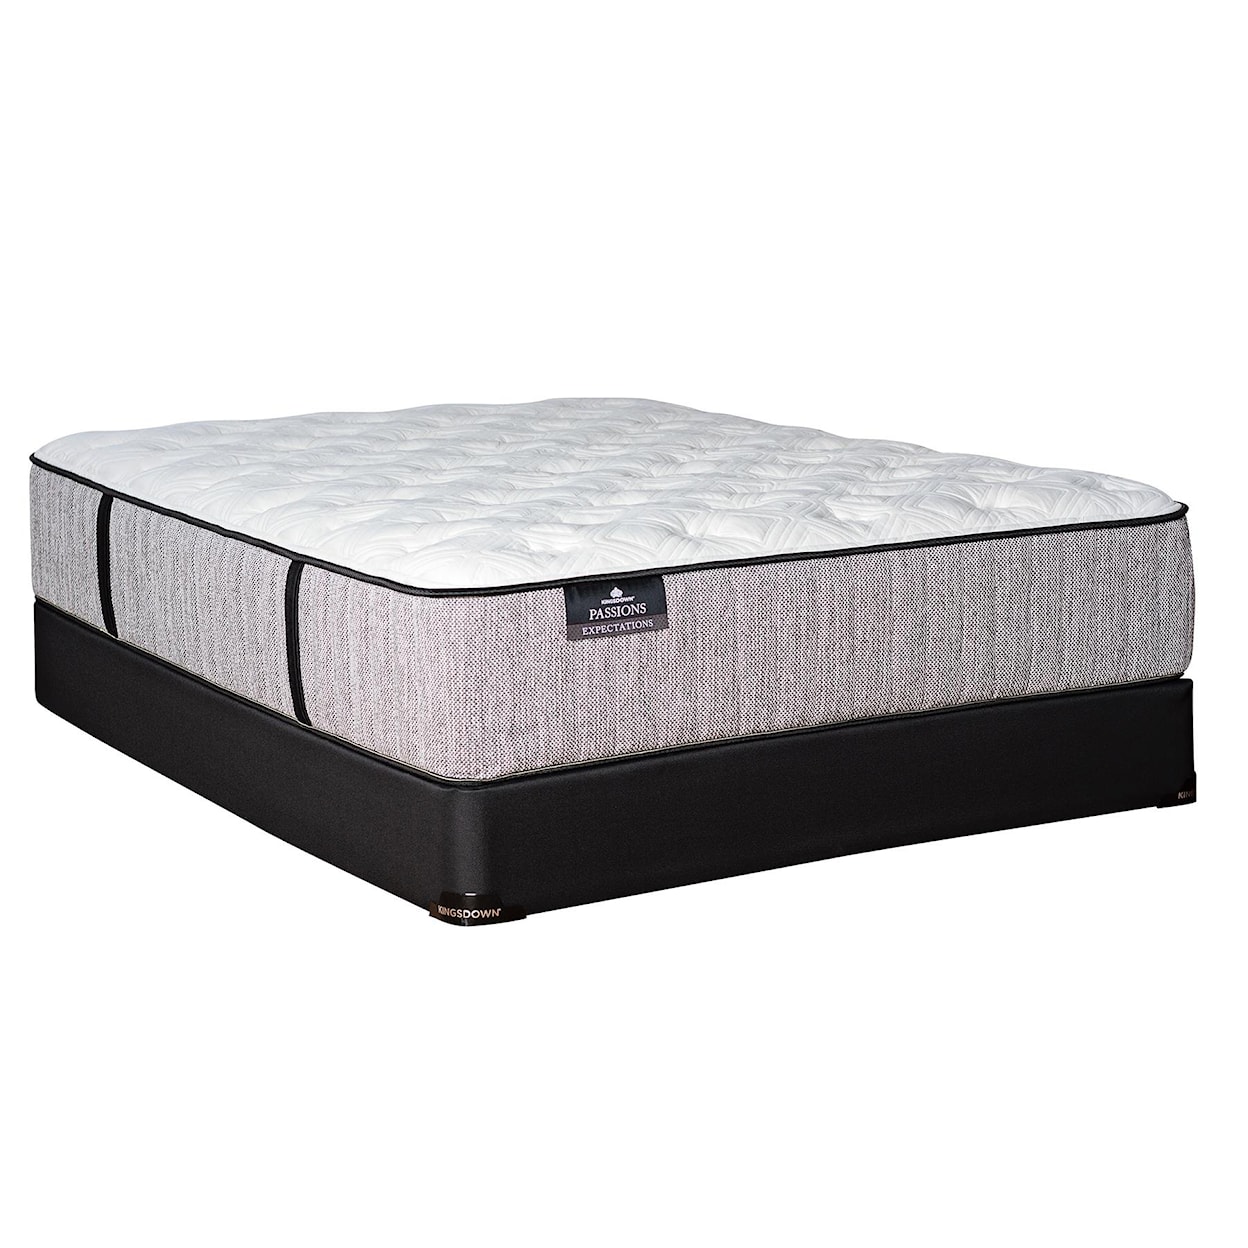 Kingsdown Passions Expectations Twin Plush Mattress with Gel Memory Foam